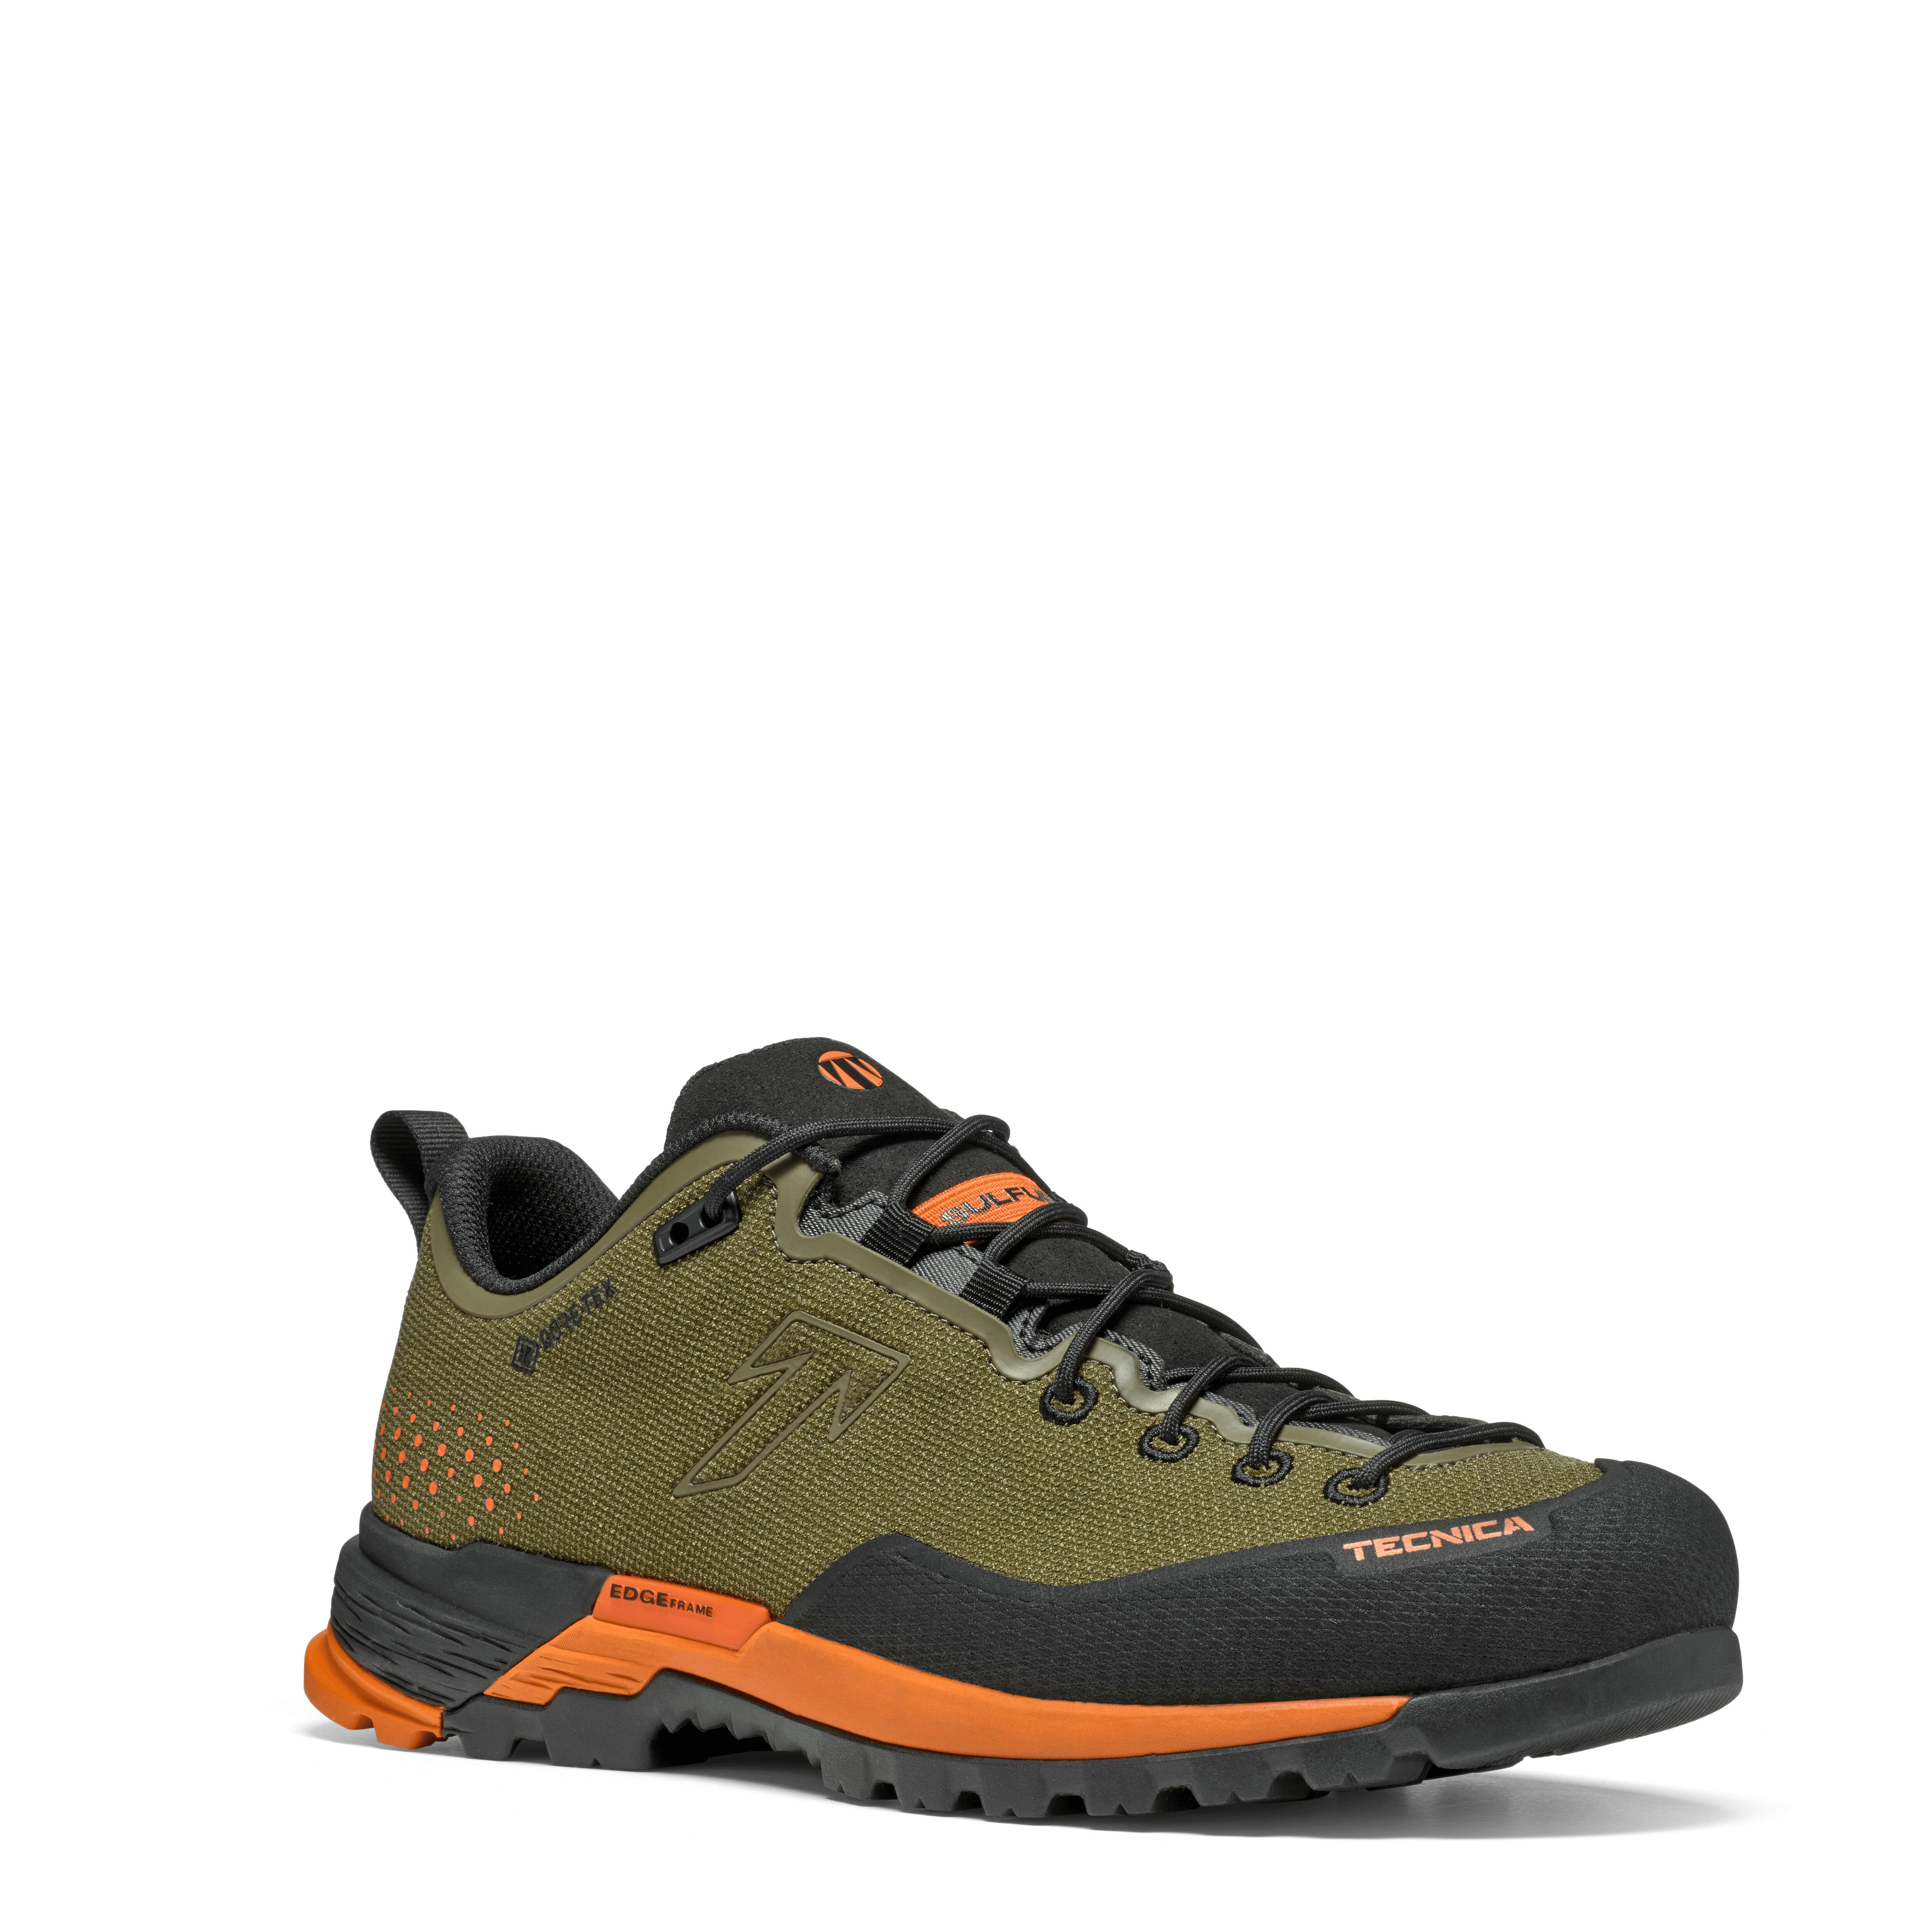 Tecnica Sulfur S GTX - Chaussures approche homme | Hardloop